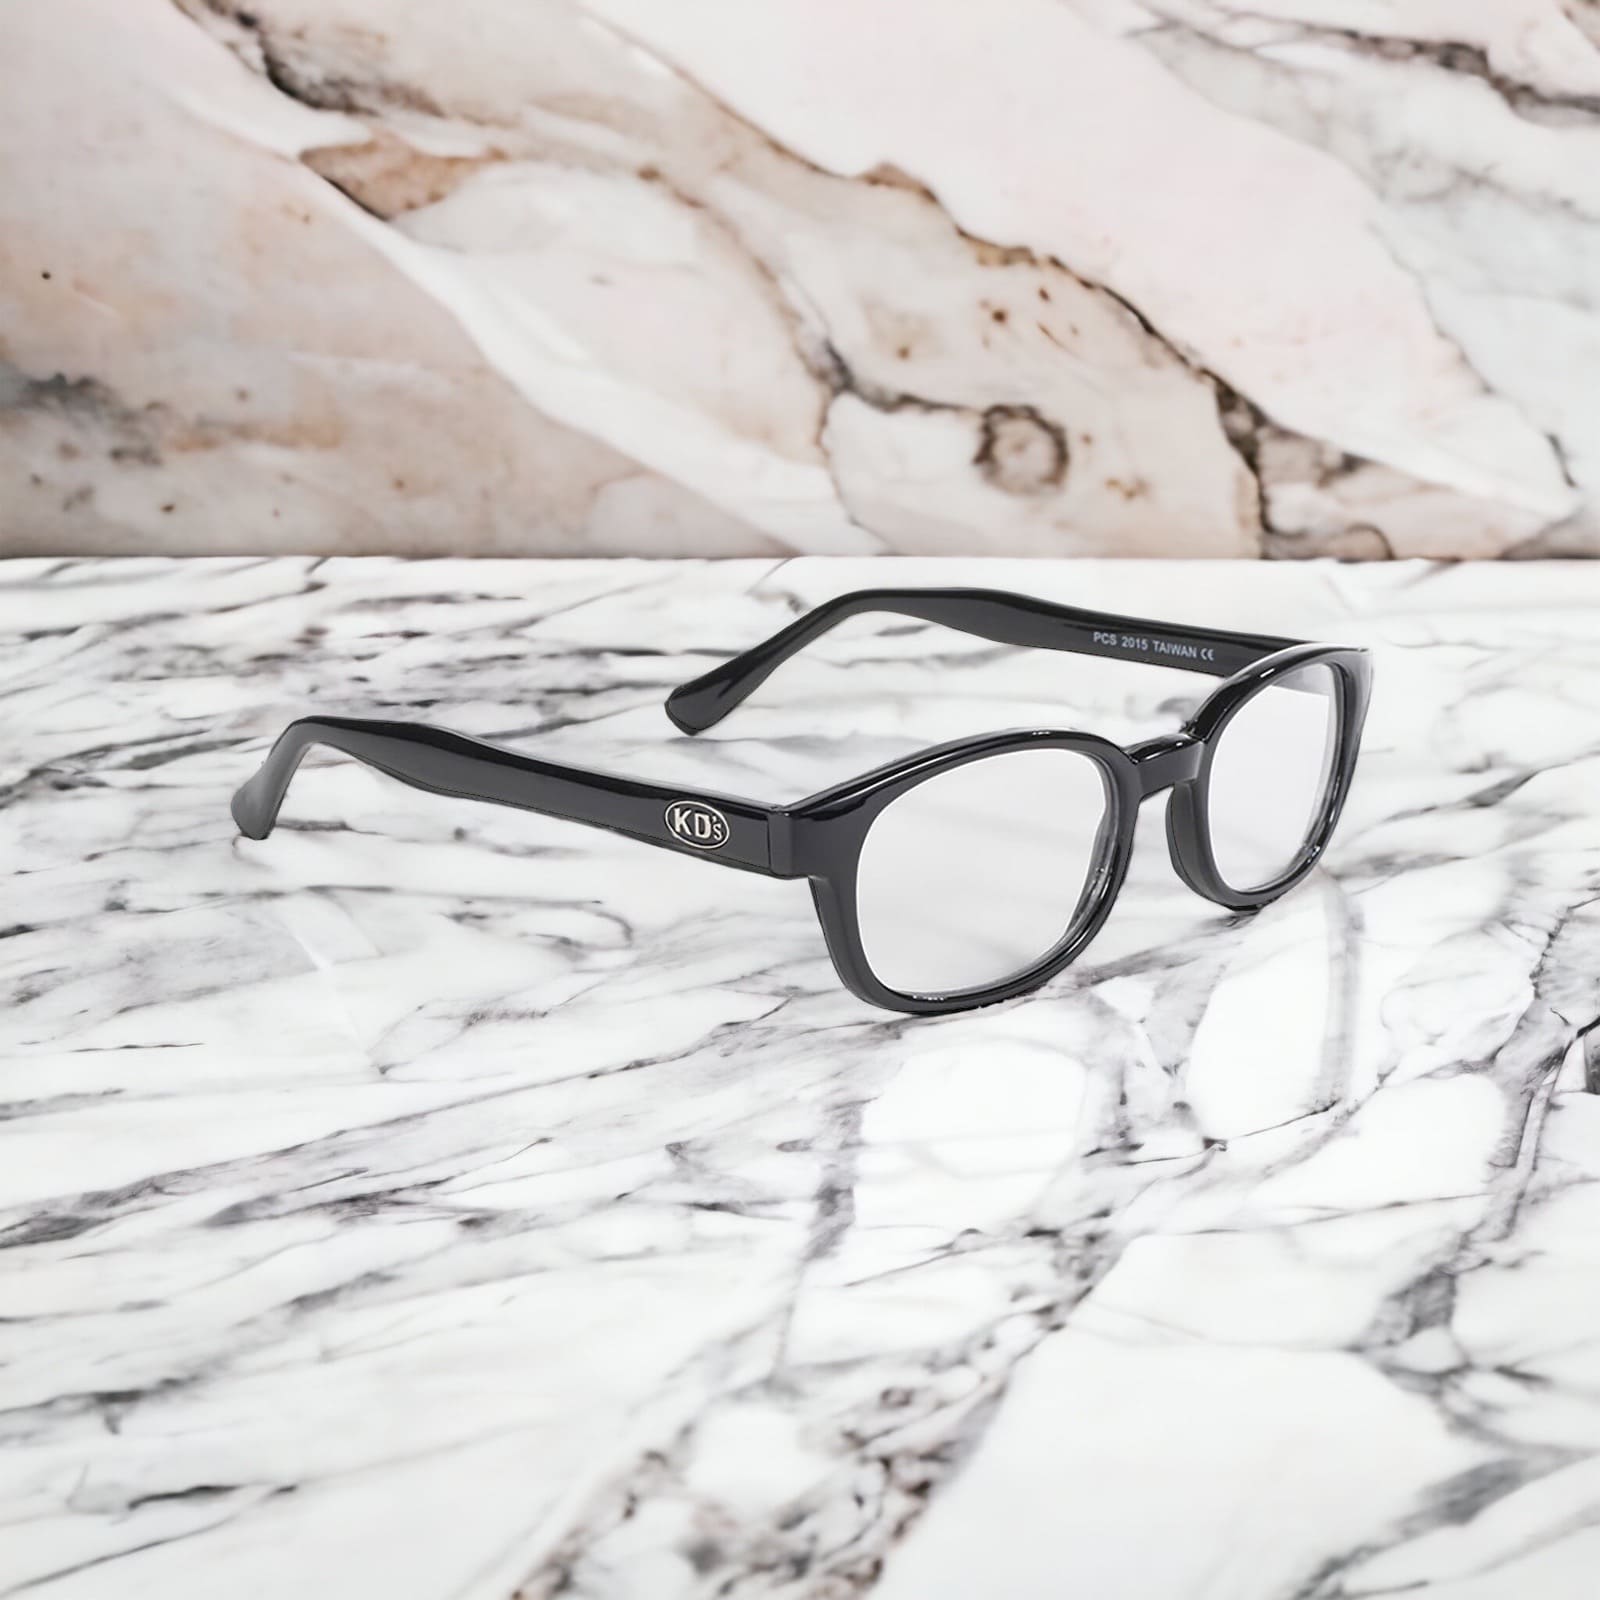 The sunglasses KD's 2015 that fit under a ski or motorcycle helmet with transparent lenses placed on a white marble countertop.